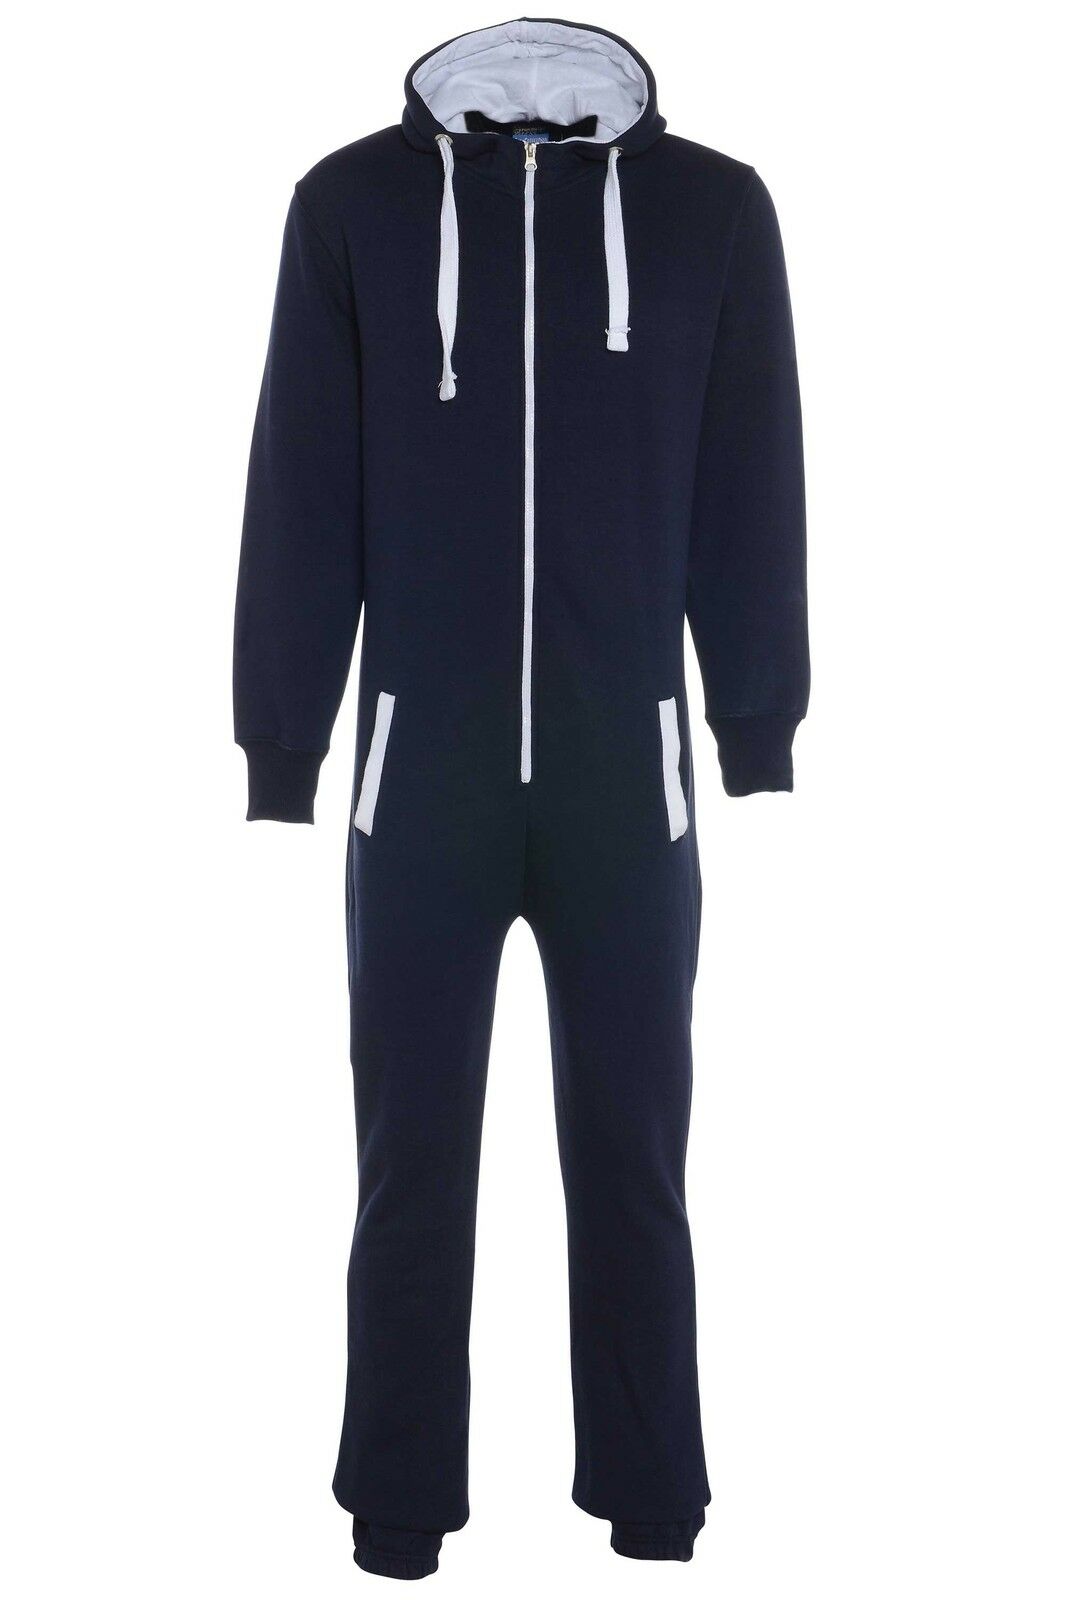 Plain Navy Onesie. These Have A White Cotton Lined Hood With The Rest Of The Onesie Being Fleece.They Have Elasticated Ribbed Cuffs And Front Pockets.The Zip At The Front Goes From The Neck To Just Below The Waist. These Are A Lose Fit Onesie. Sizes 2XL To 4XL Available.